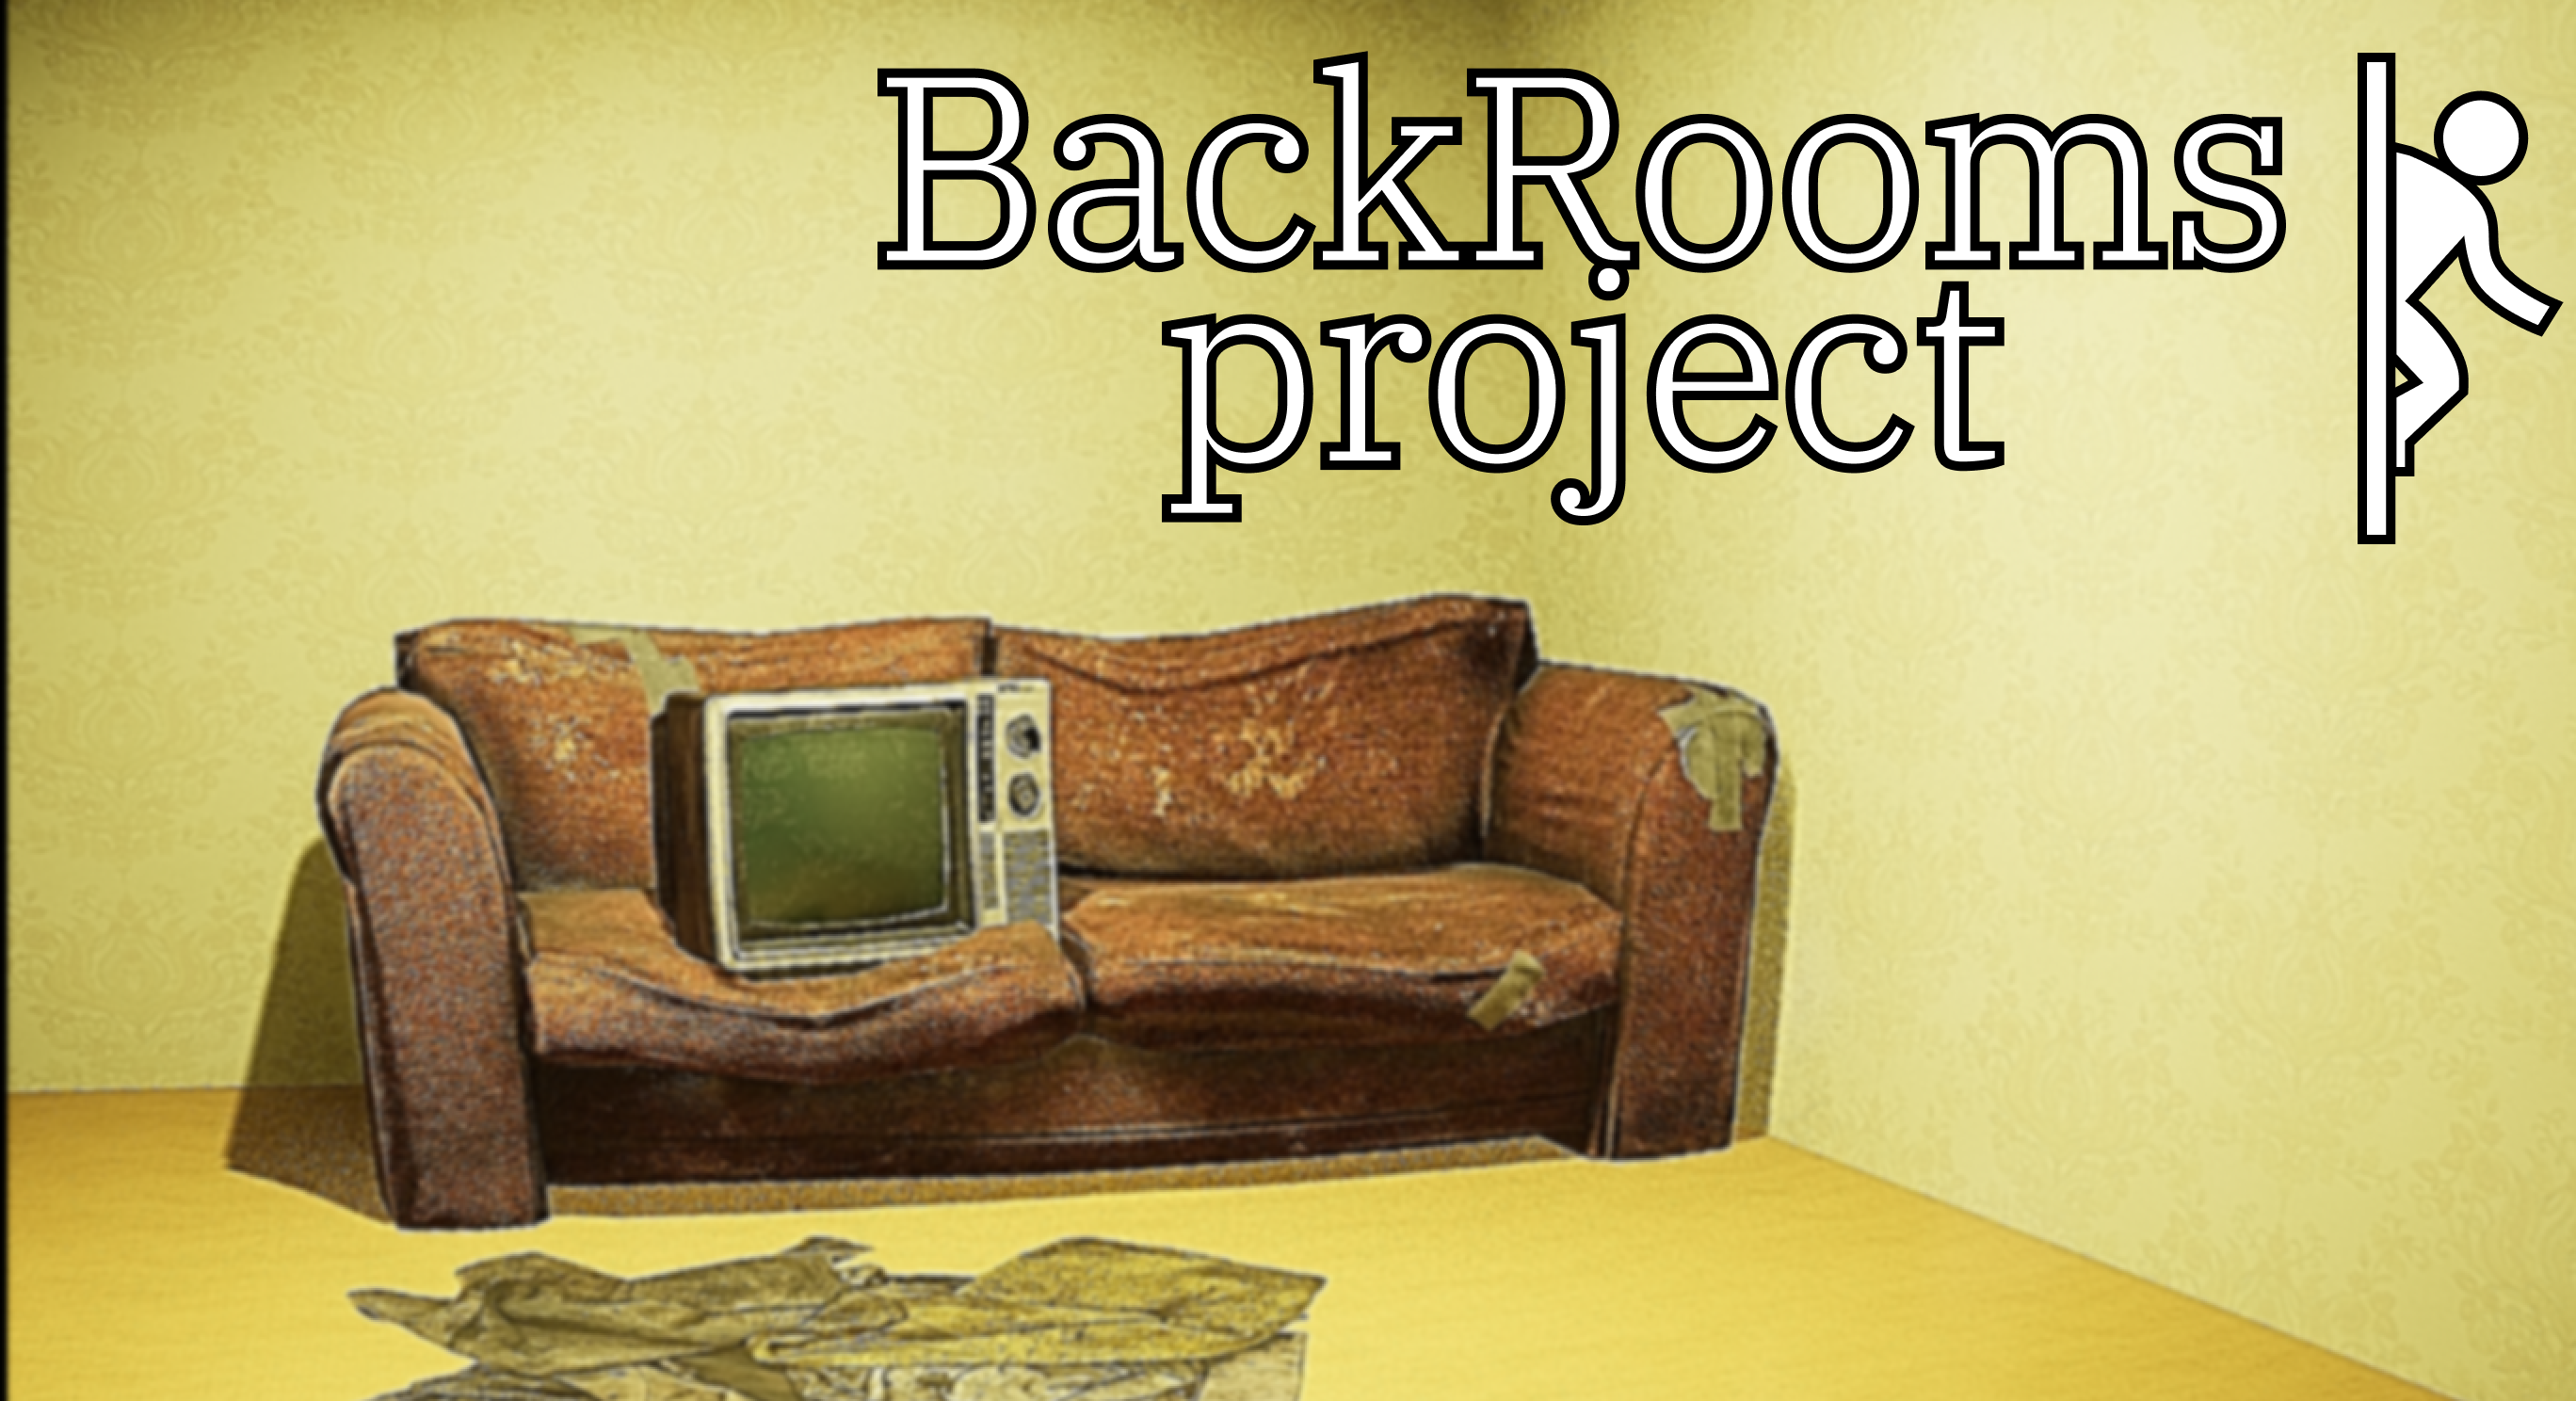 Project Nostalgia - A Backrooms game (@ProjectNos86260) / X